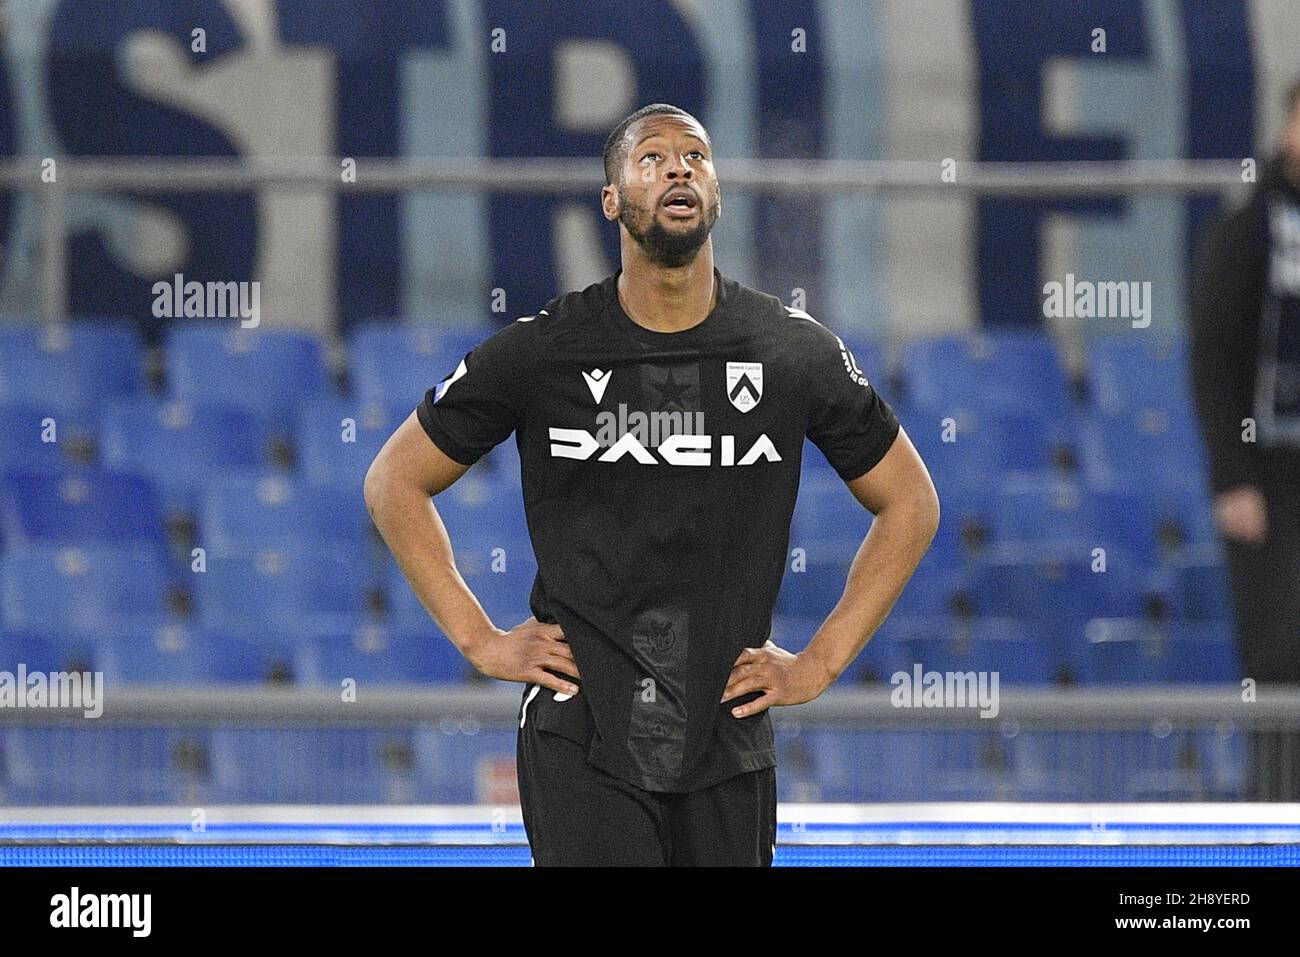 Rome, Italy. 2 December 2021, Norberto Bercique Gomes Betuncal (Udinese) during the  Italian Football Championship League A 2021/2022 match between SS Lazio vs Udinese Calcio at the Olimpic Stadium in Rome on 02 December 2021. Stock Photo